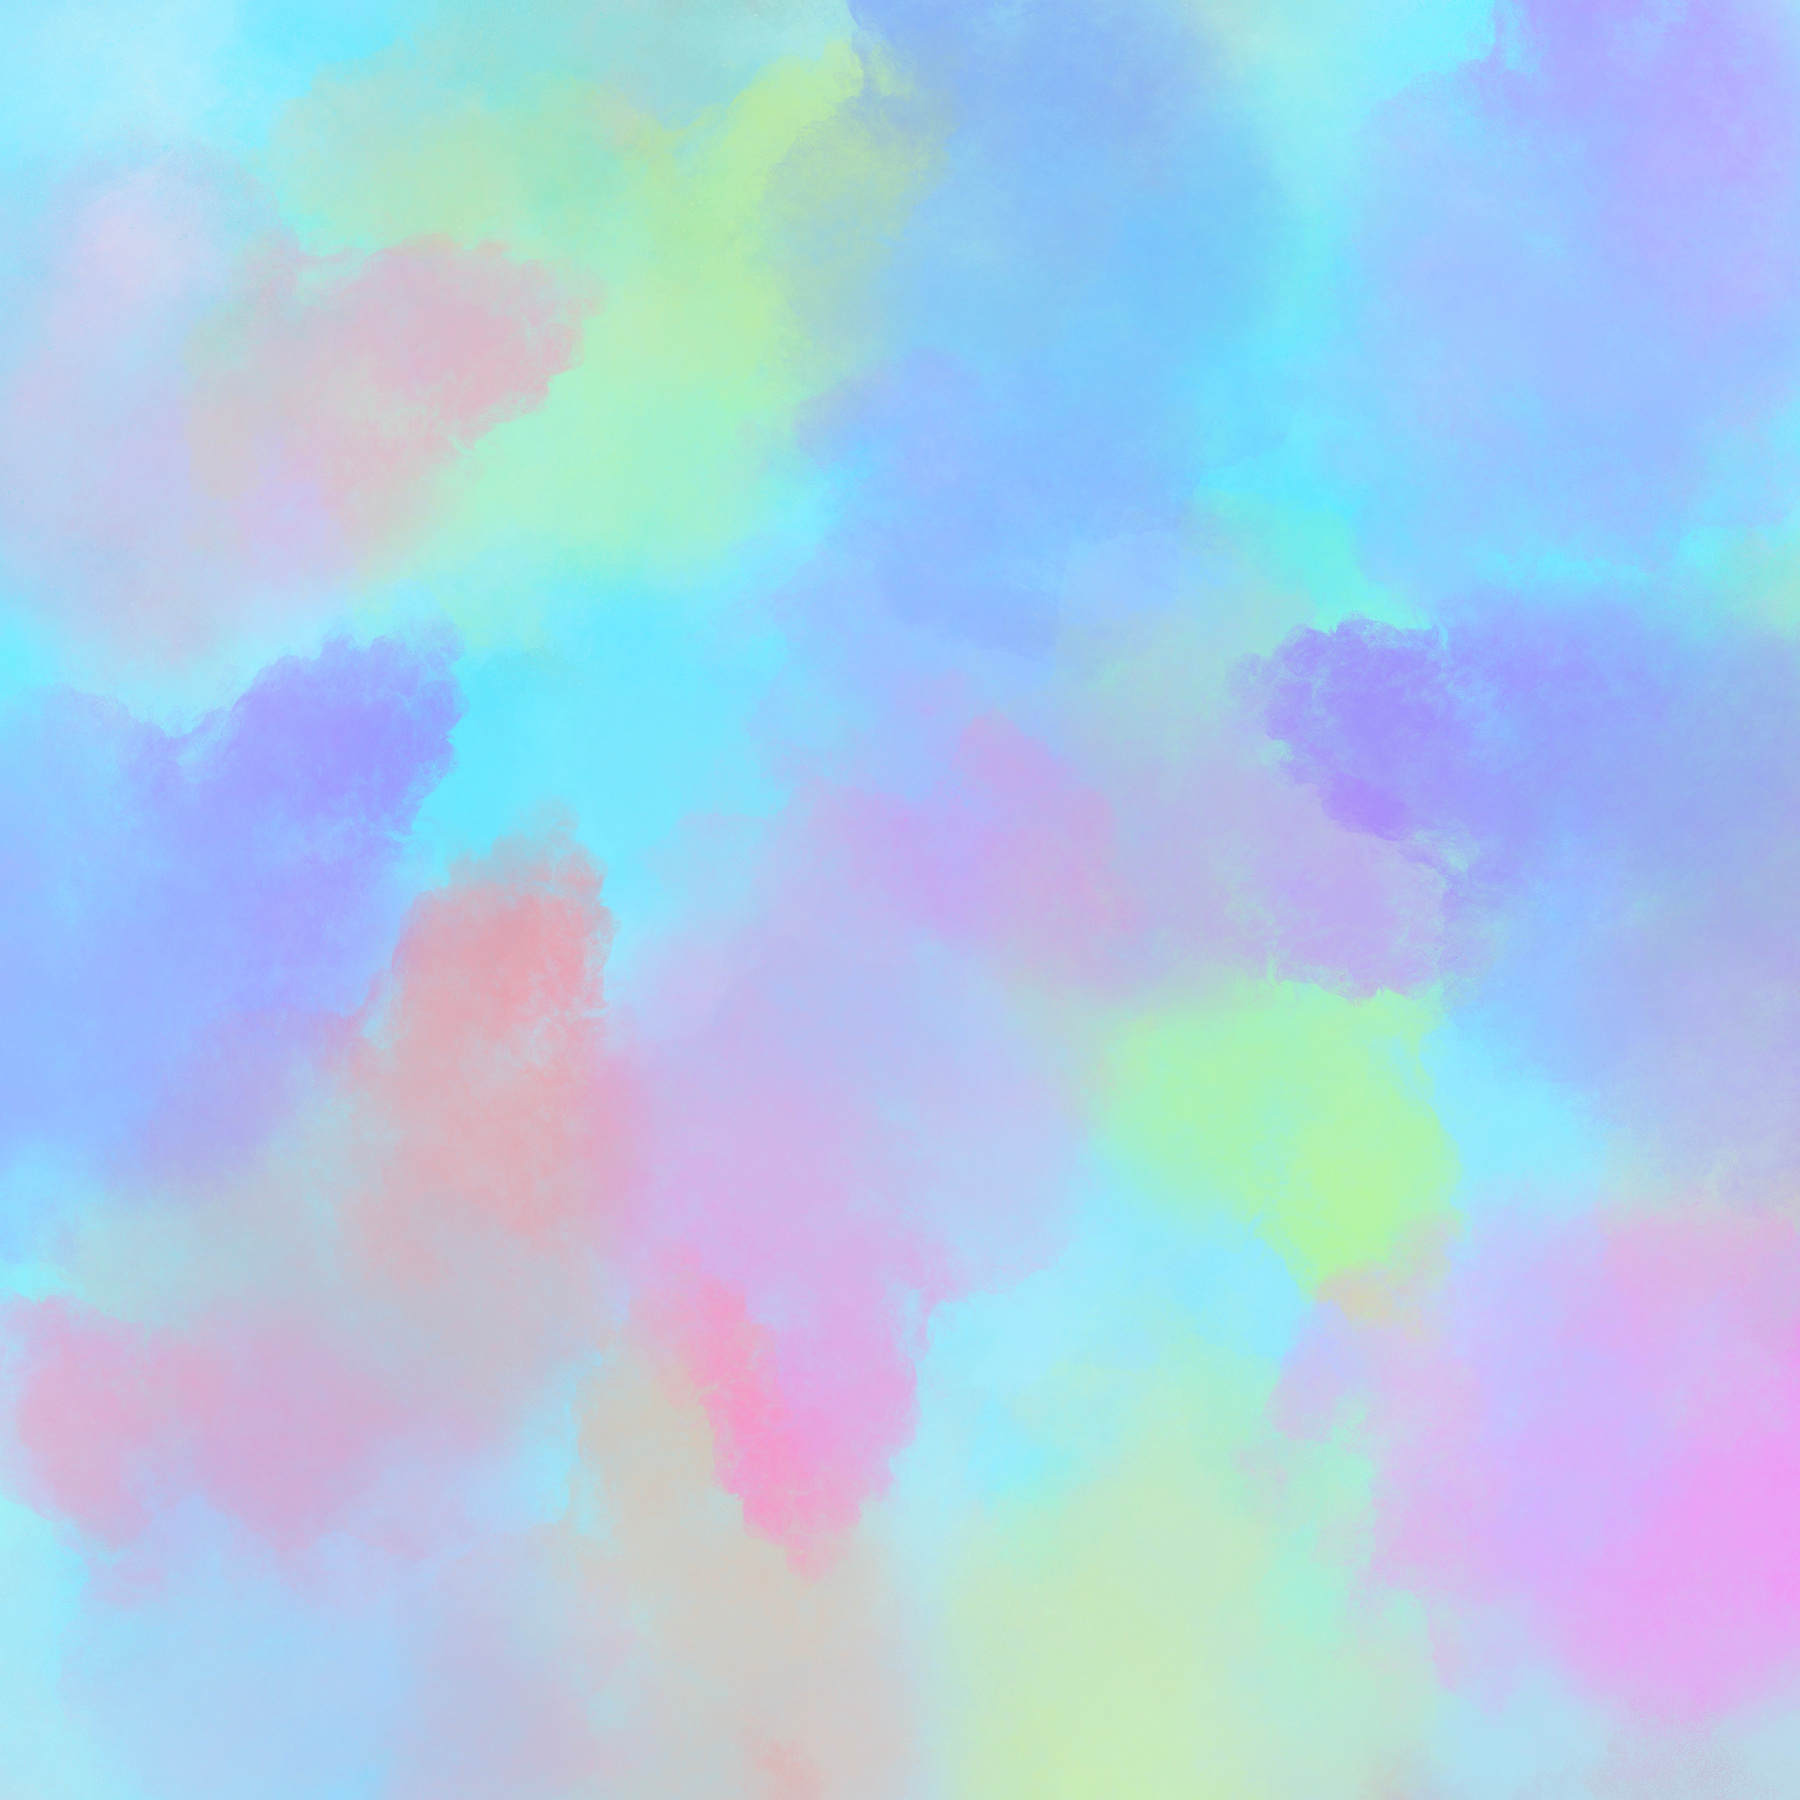 Colorful Watercolor Stains Background 